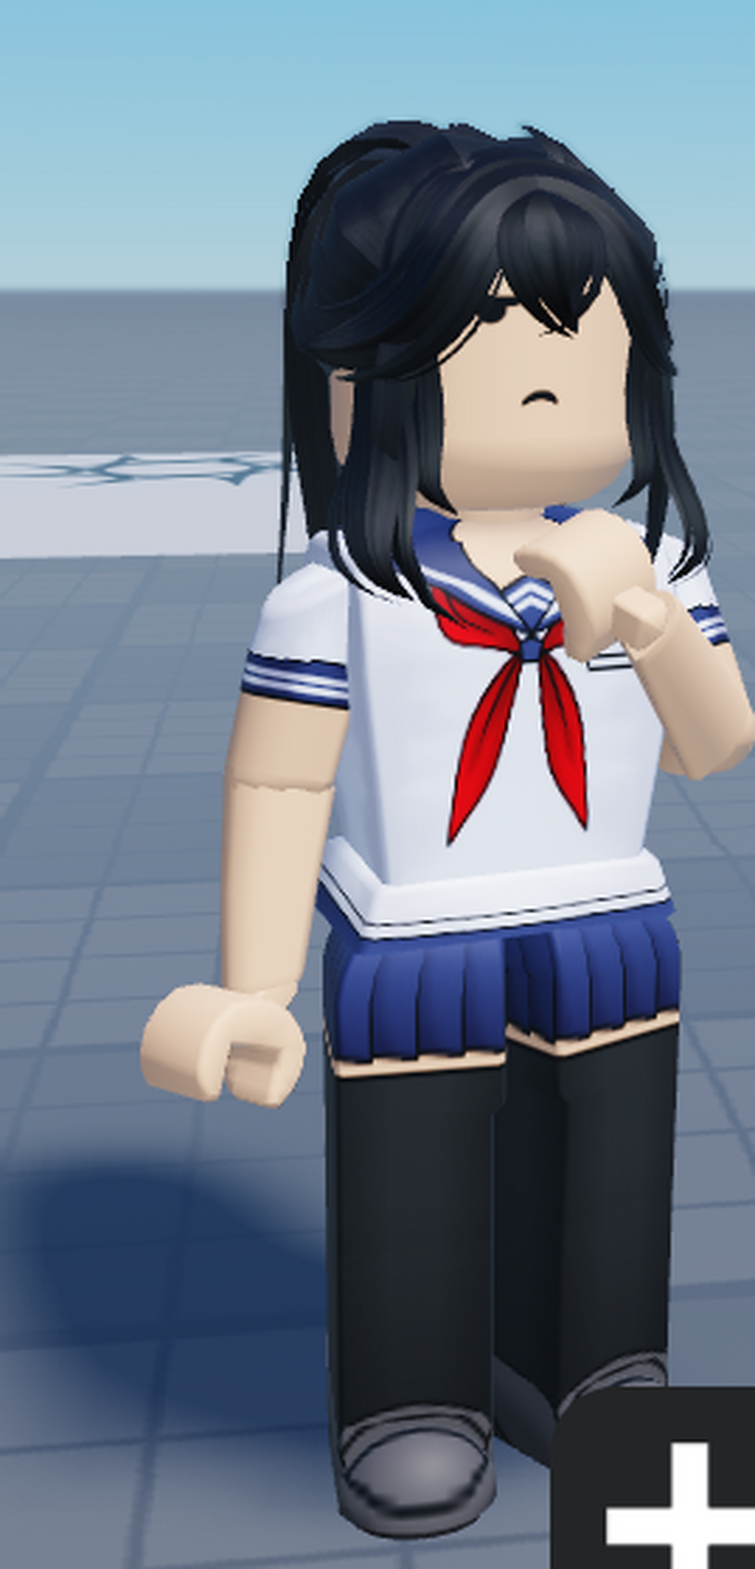 i made yandere simulator characters in roblox